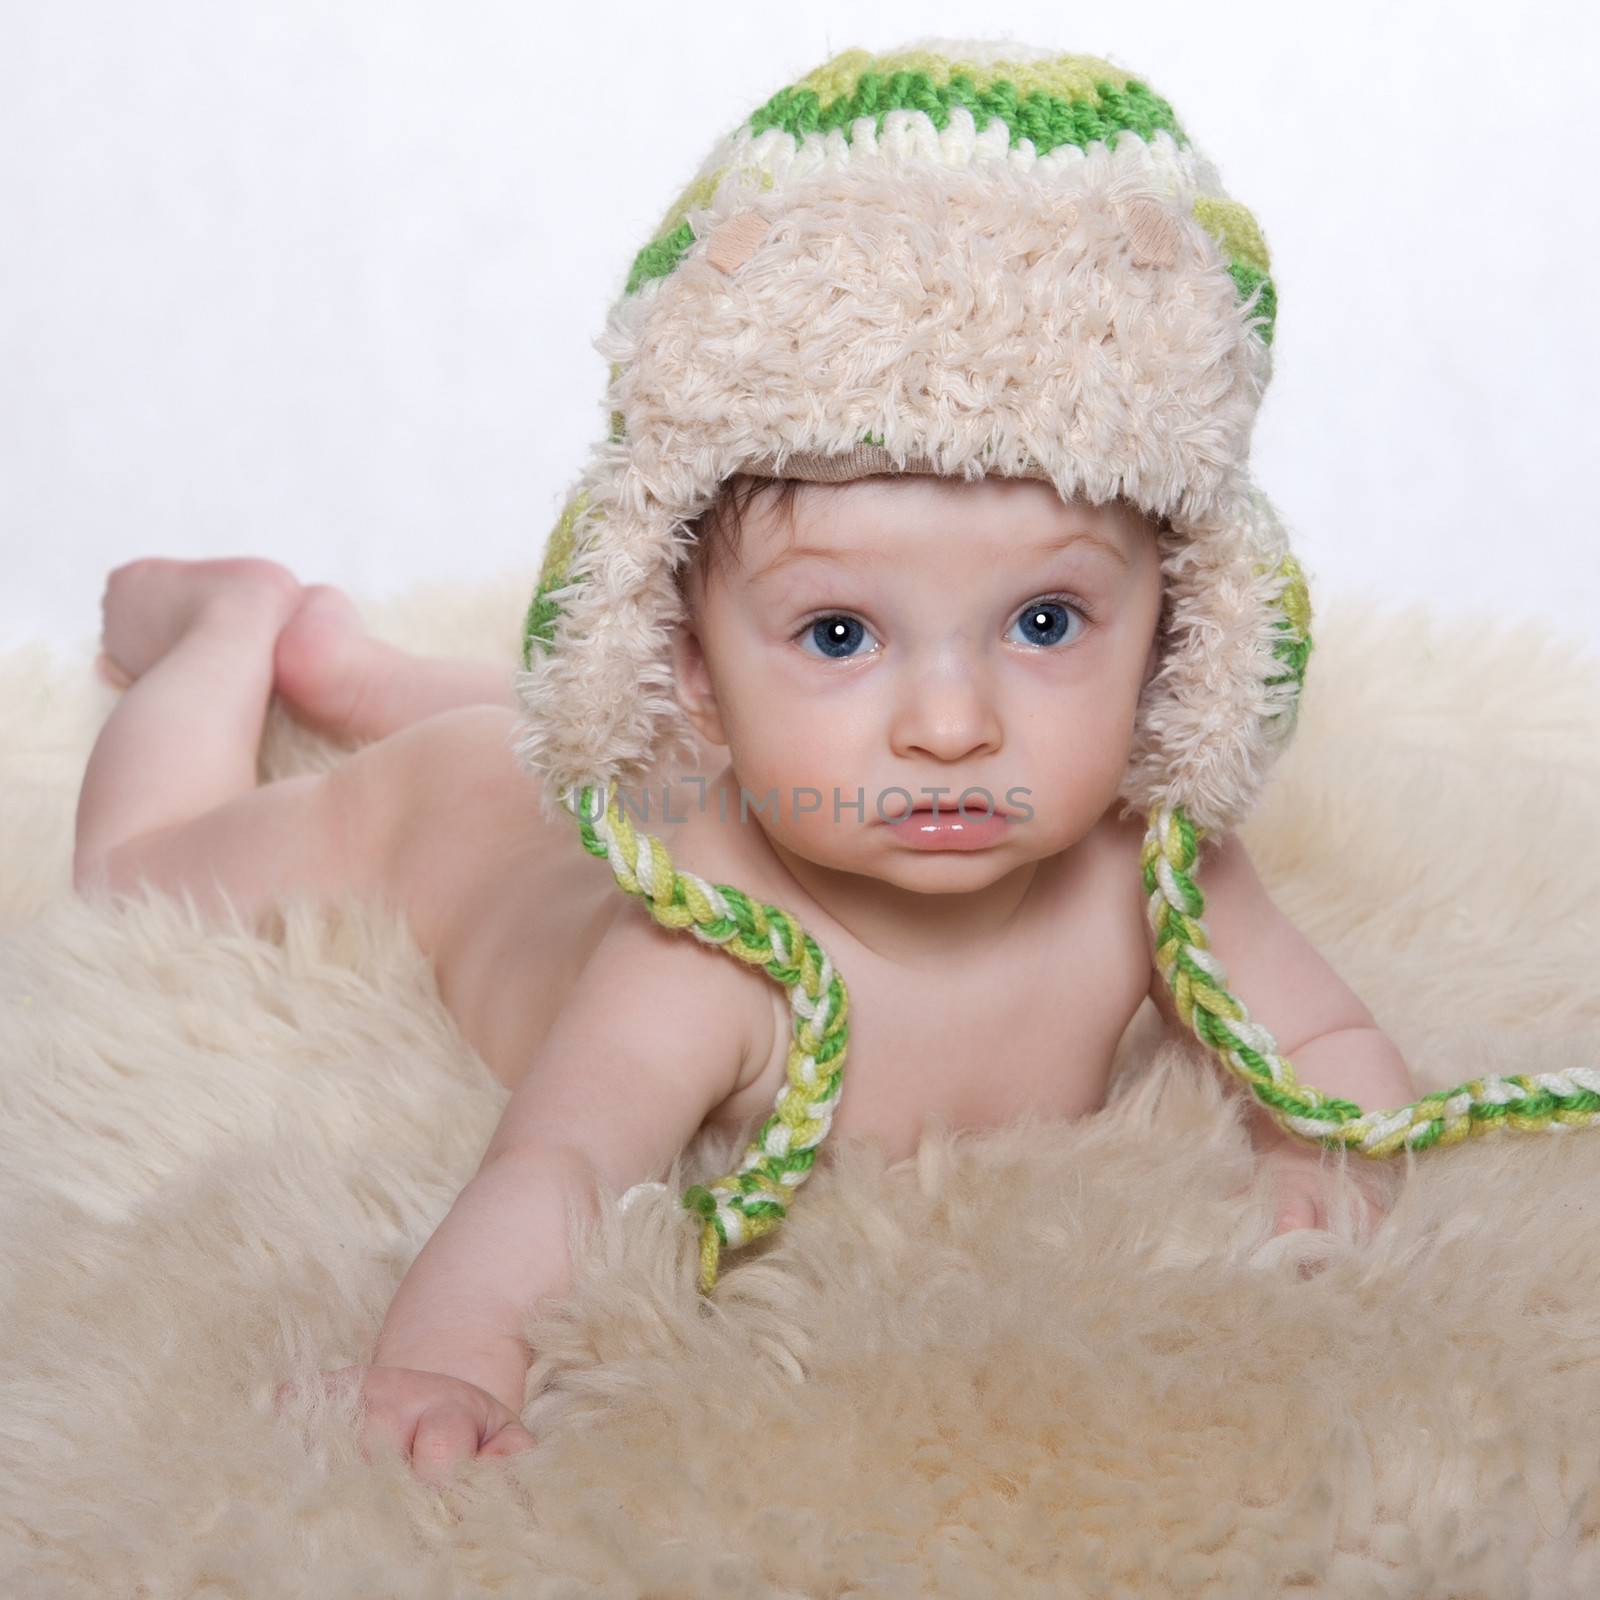 Little baby boy, lying naked on stomach on woolen fleece, on his head is cap, on a white background